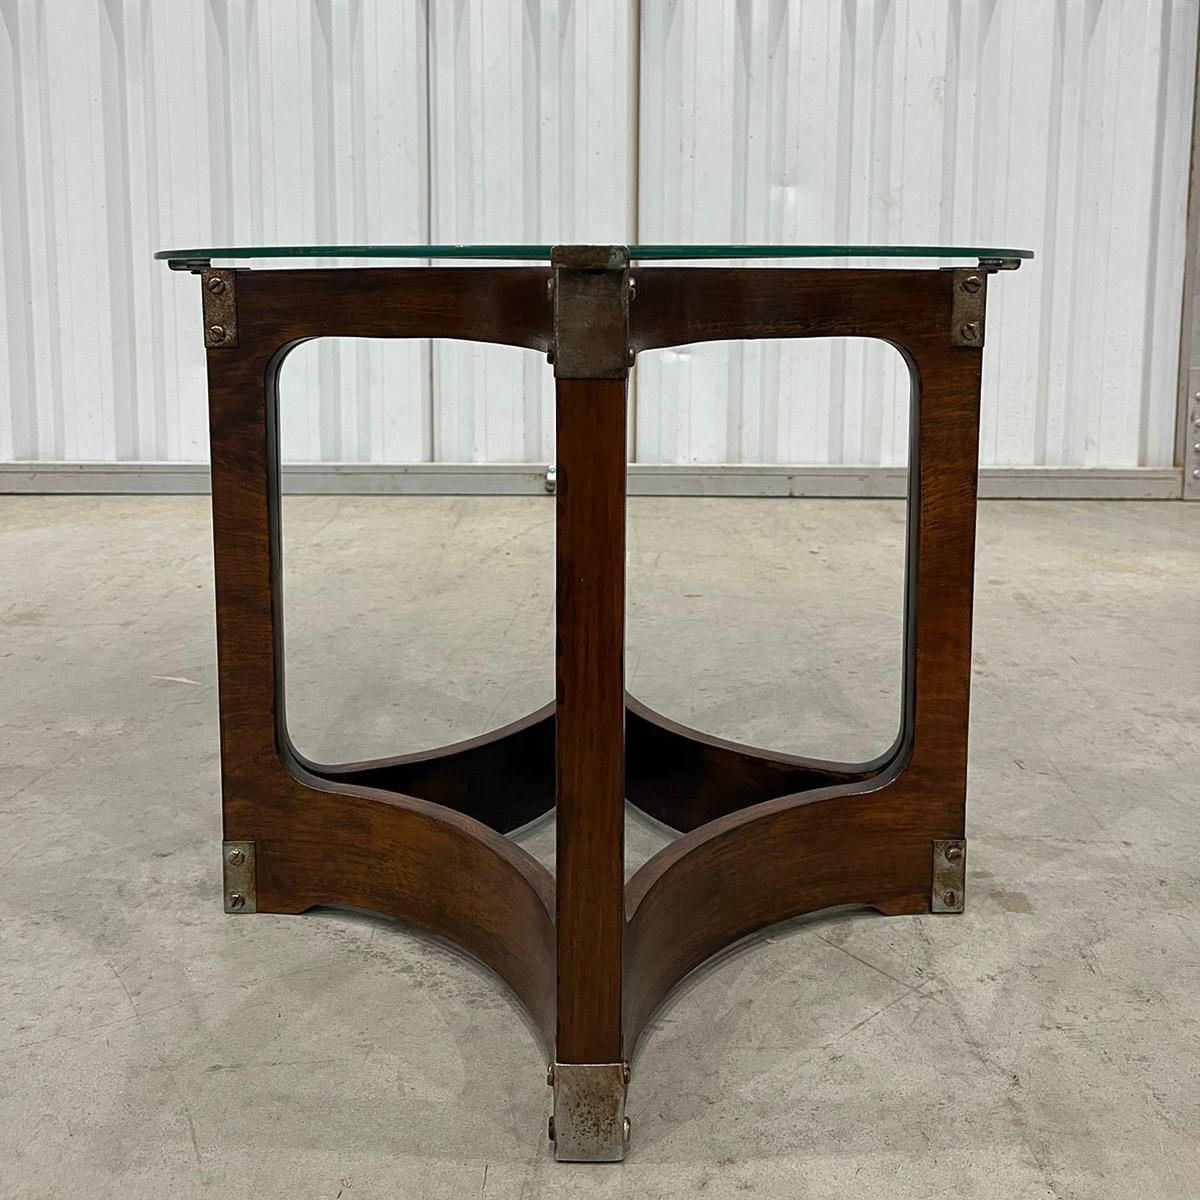 Mid-Century Modern Side Table in Bentwood & Glass by Novo Rumo, 1960s, Brazil For Sale 6